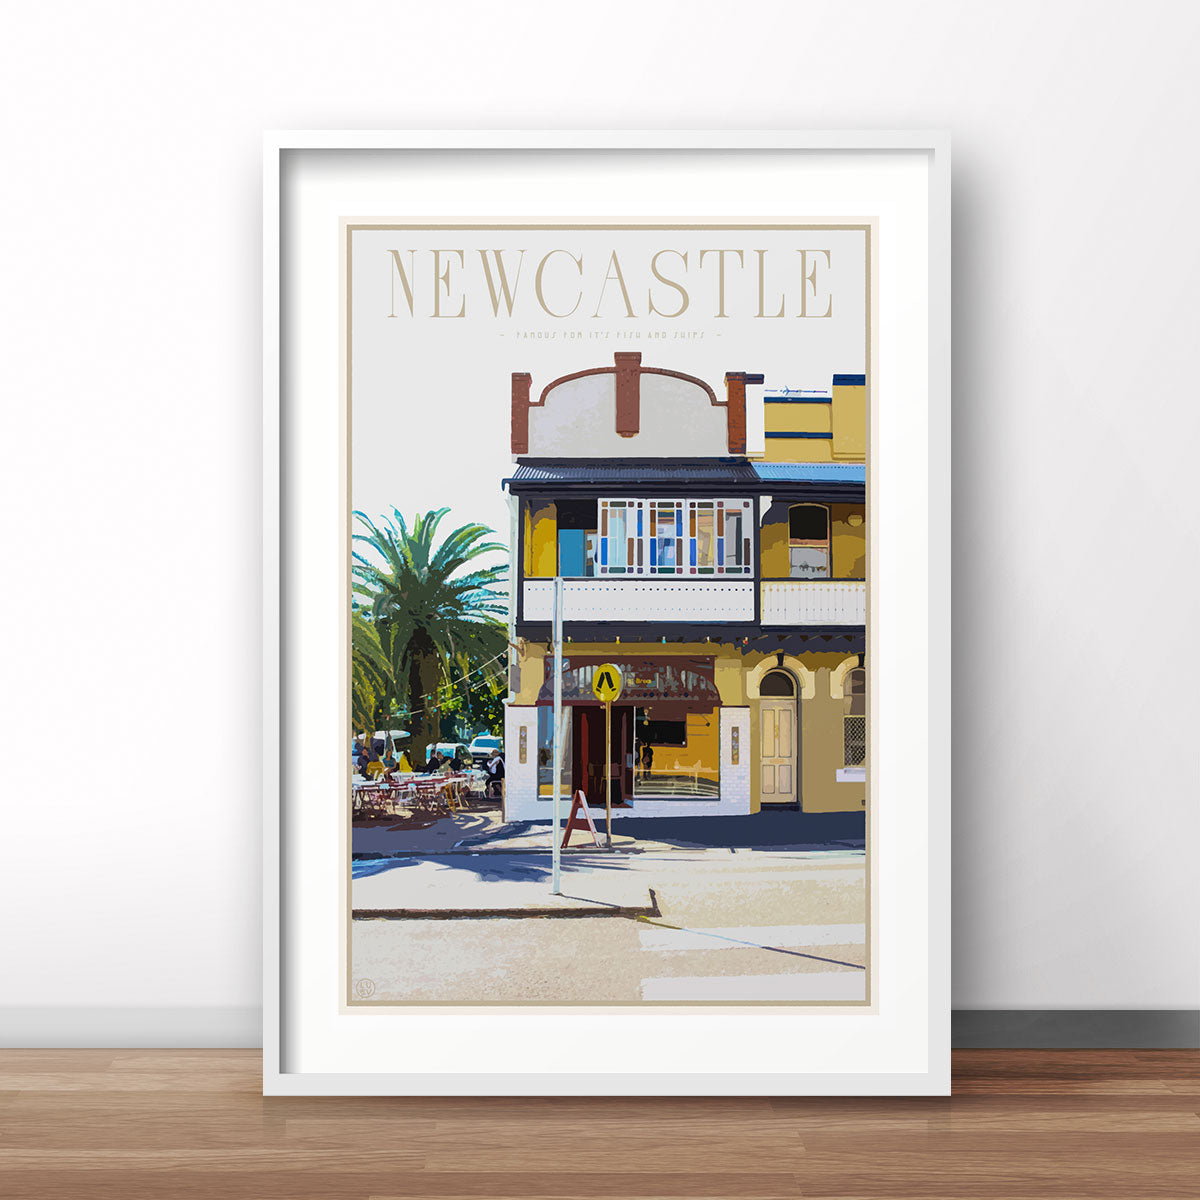 Newcastle fish and chips vintage travel style framed print places we luv